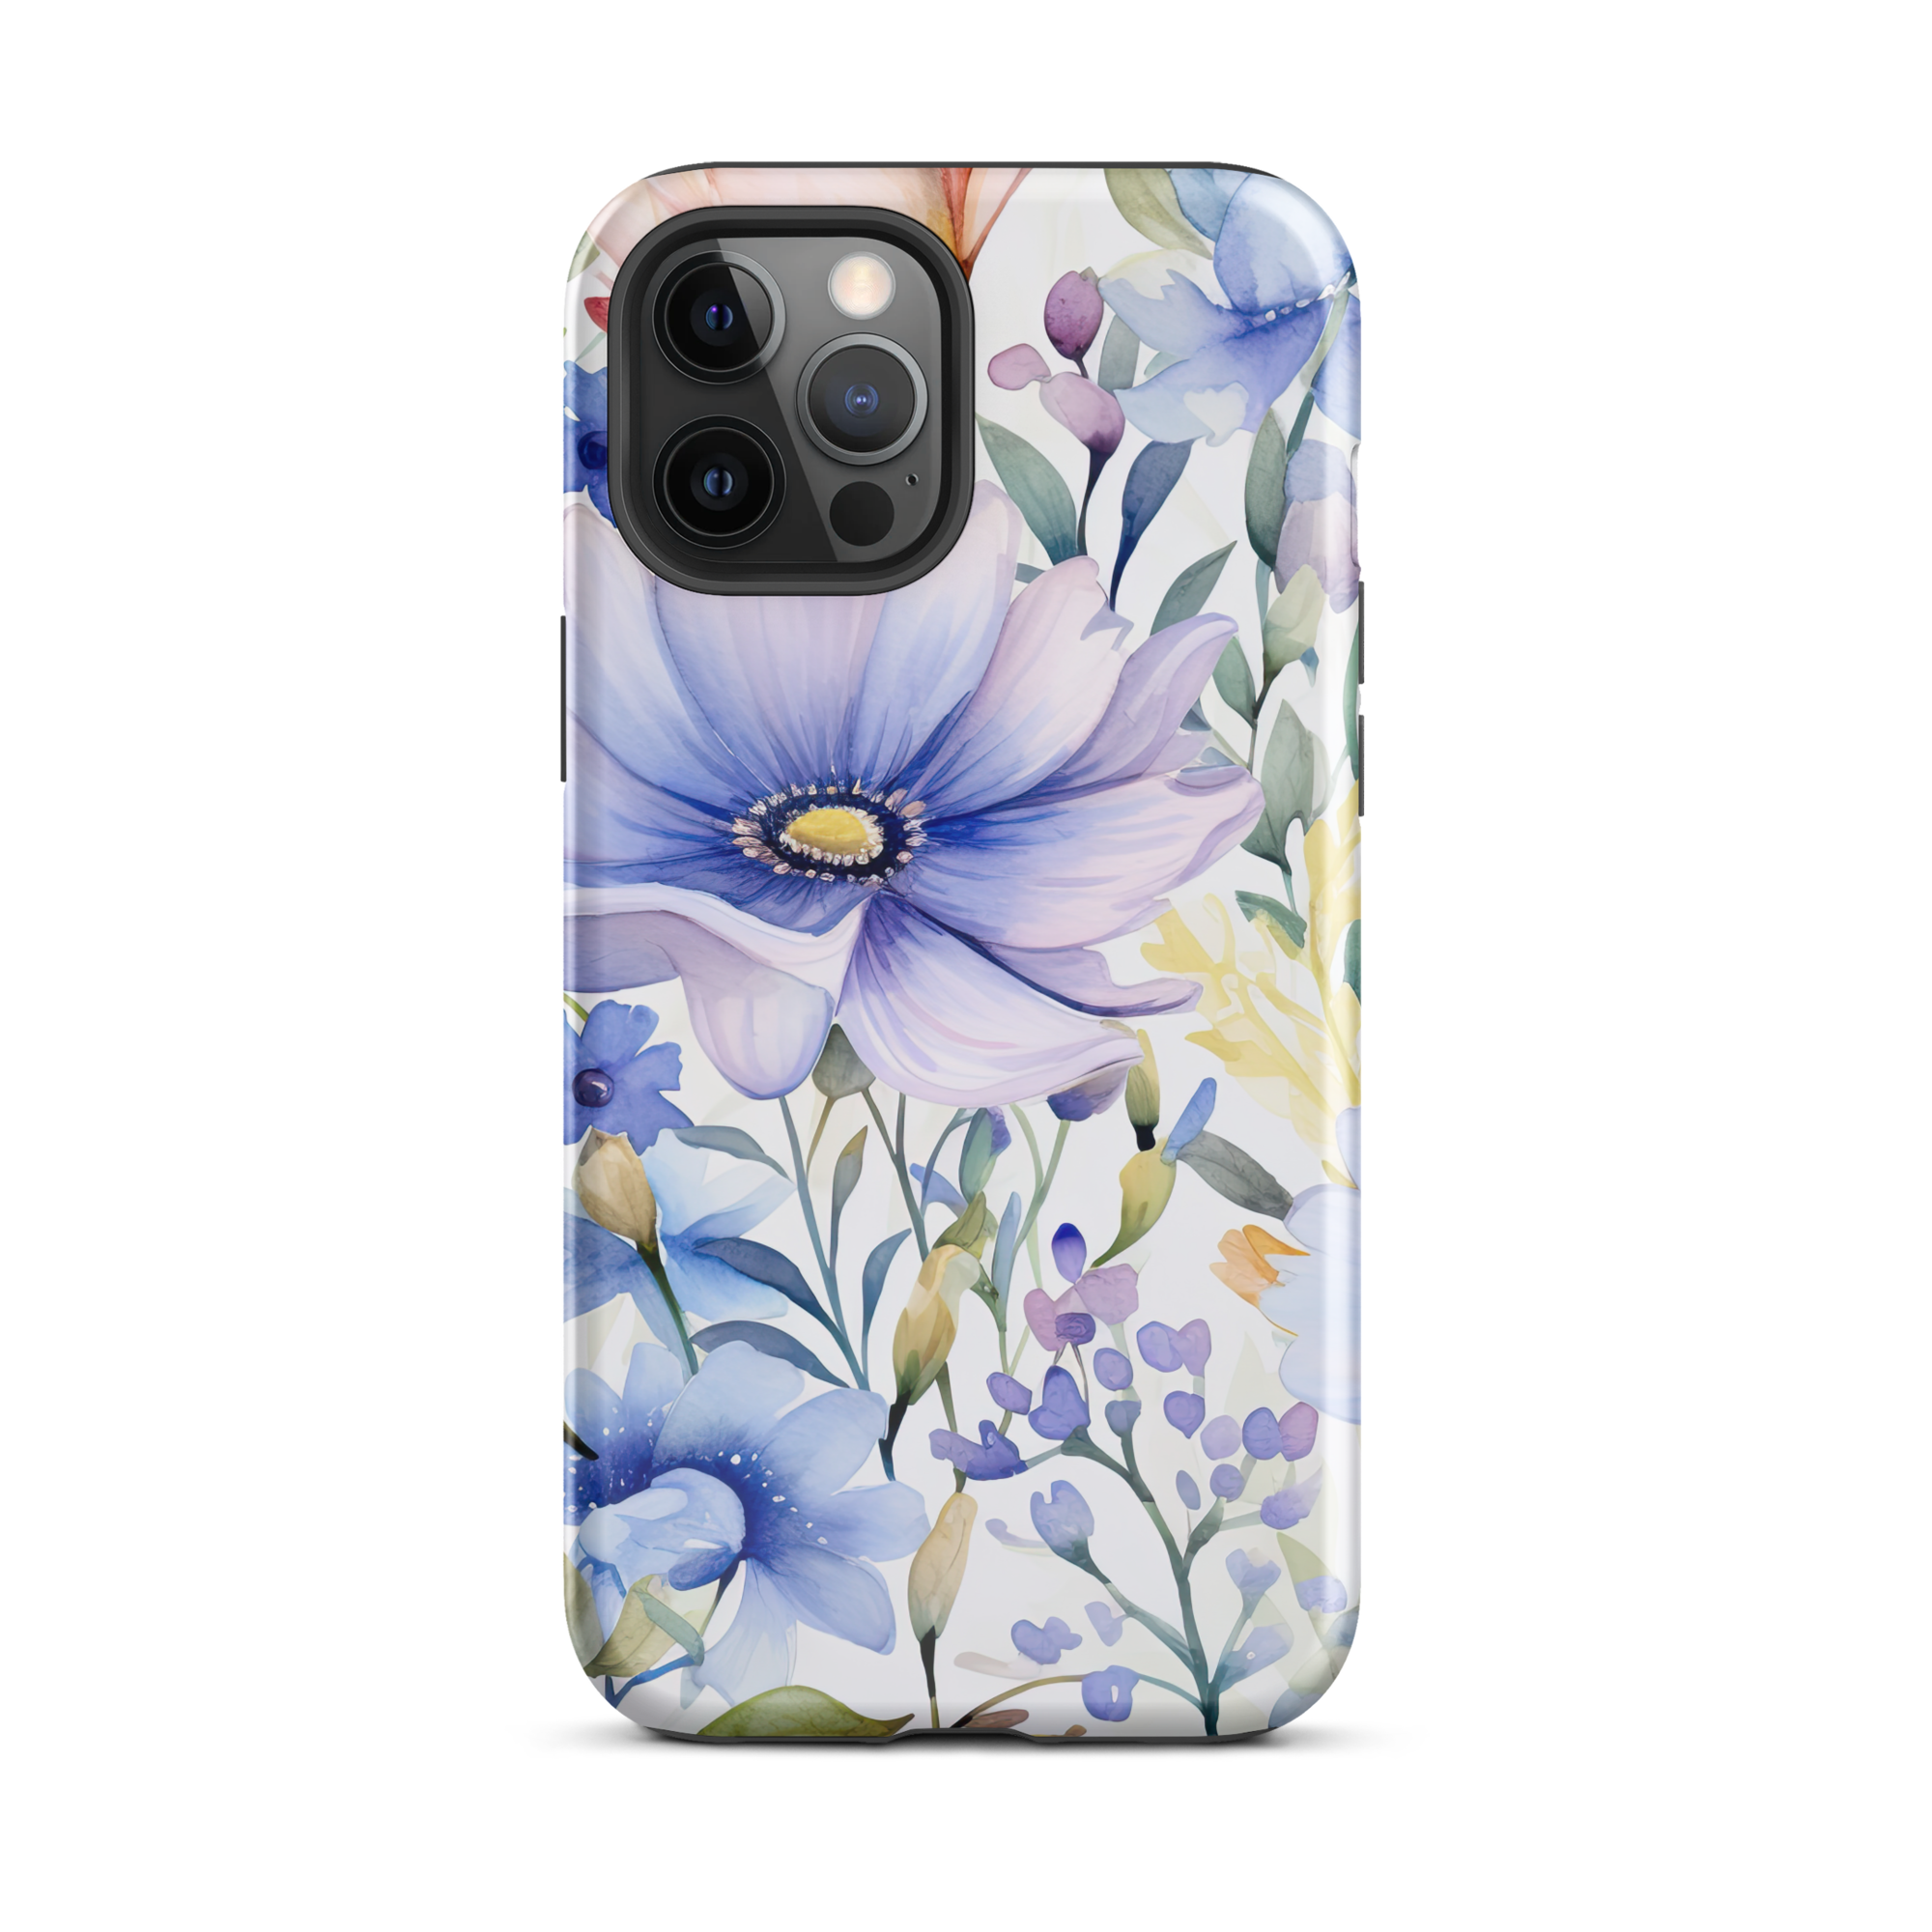 Serenity Blooms iPhone 12 Pro Max Case